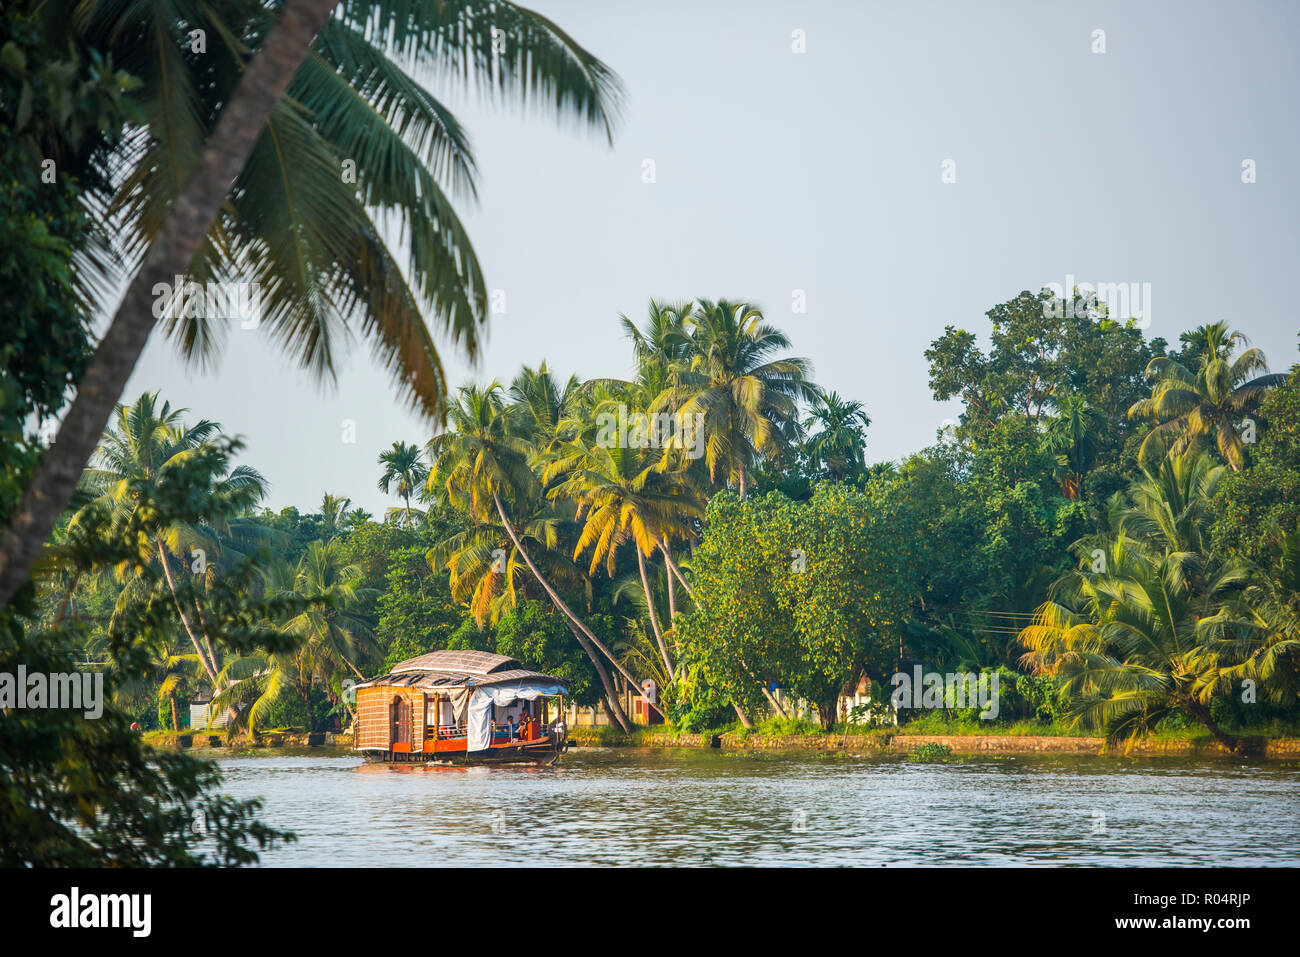 Houseboat in the backwaters near Alleppey (Alappuzha), Kerala, India, Asia Stock Photo